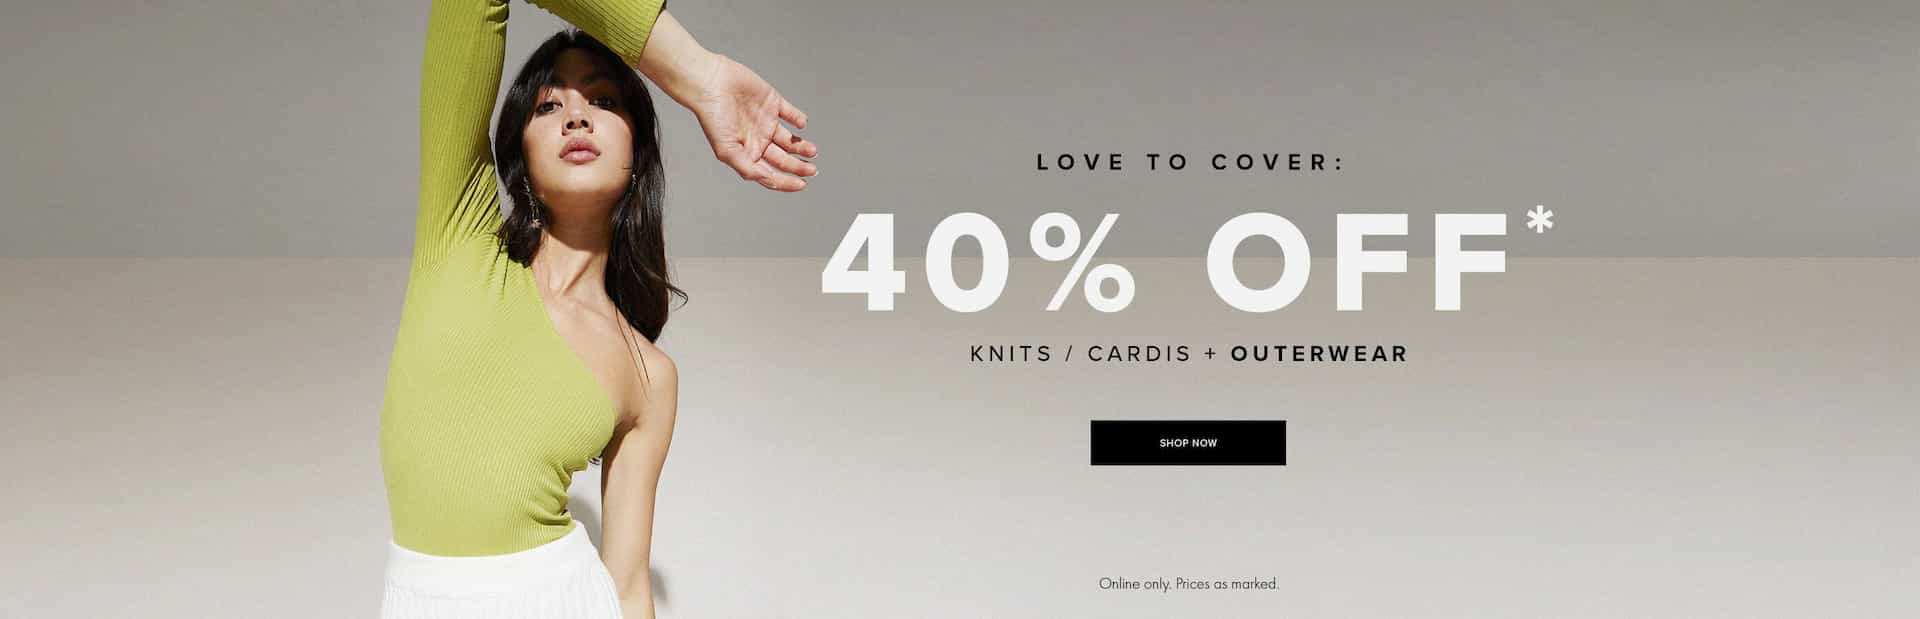 40% OFF on knits, cardis & outerwear